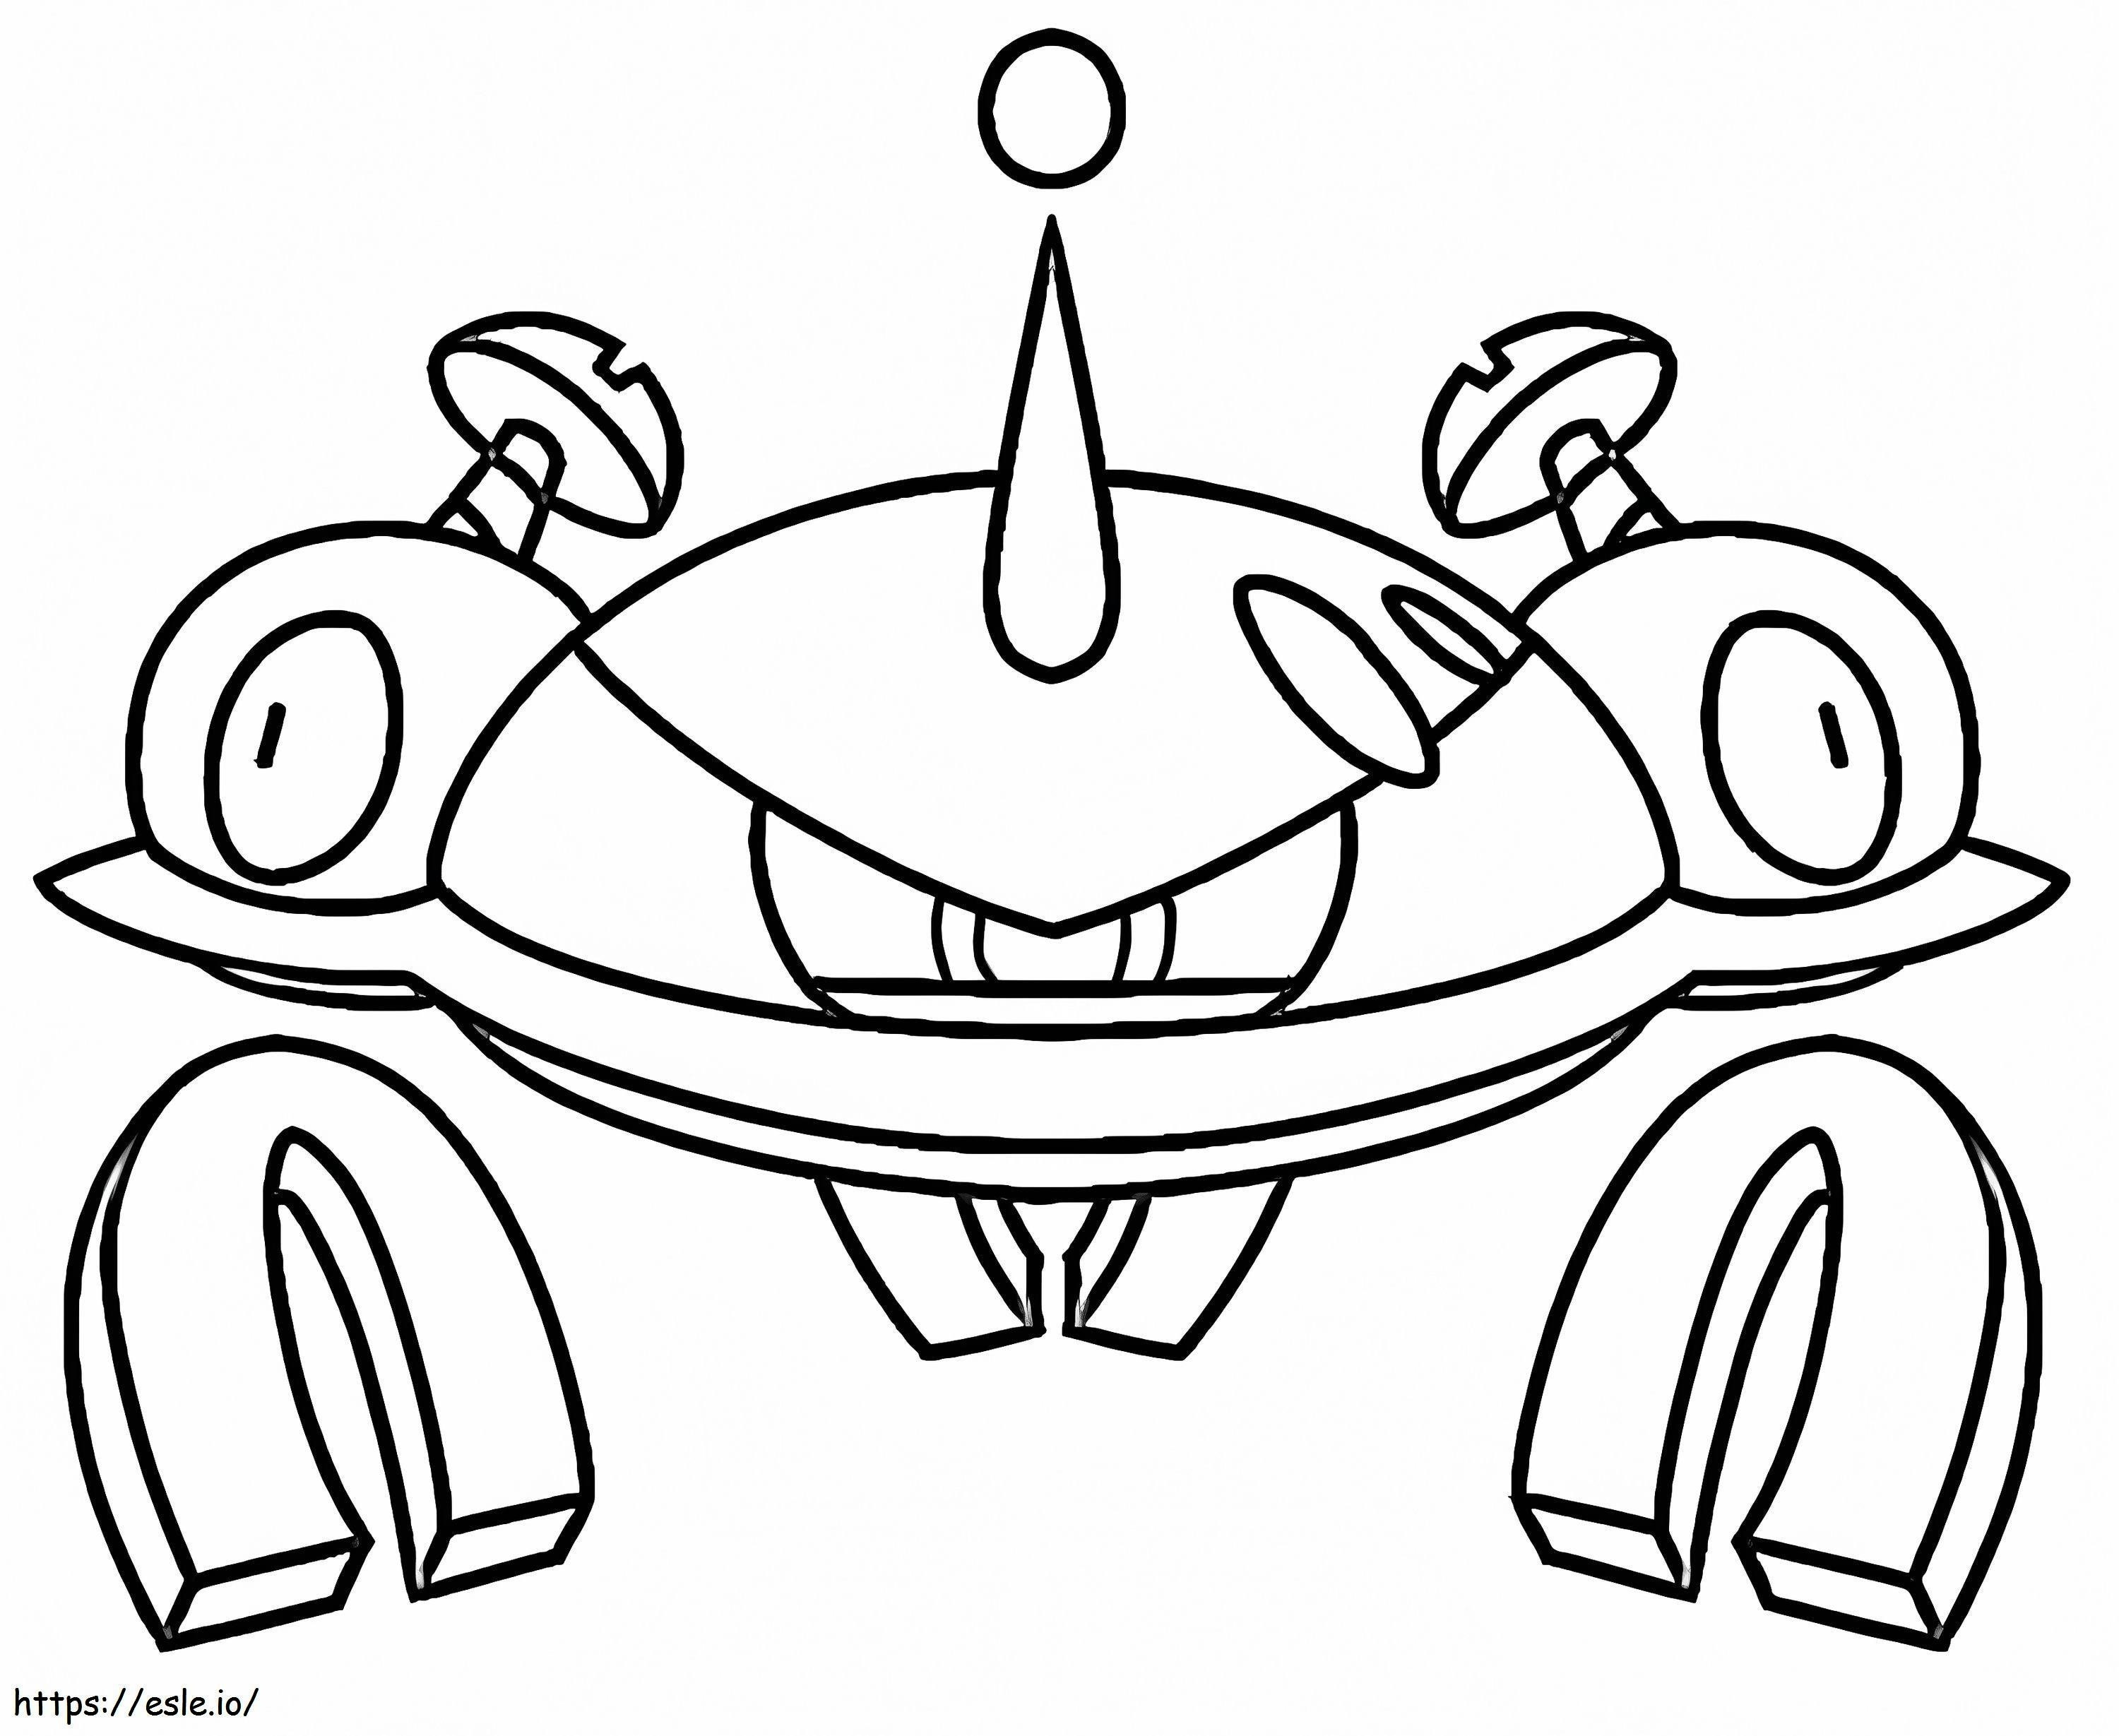 Magnezone Pokemon 1 coloring page